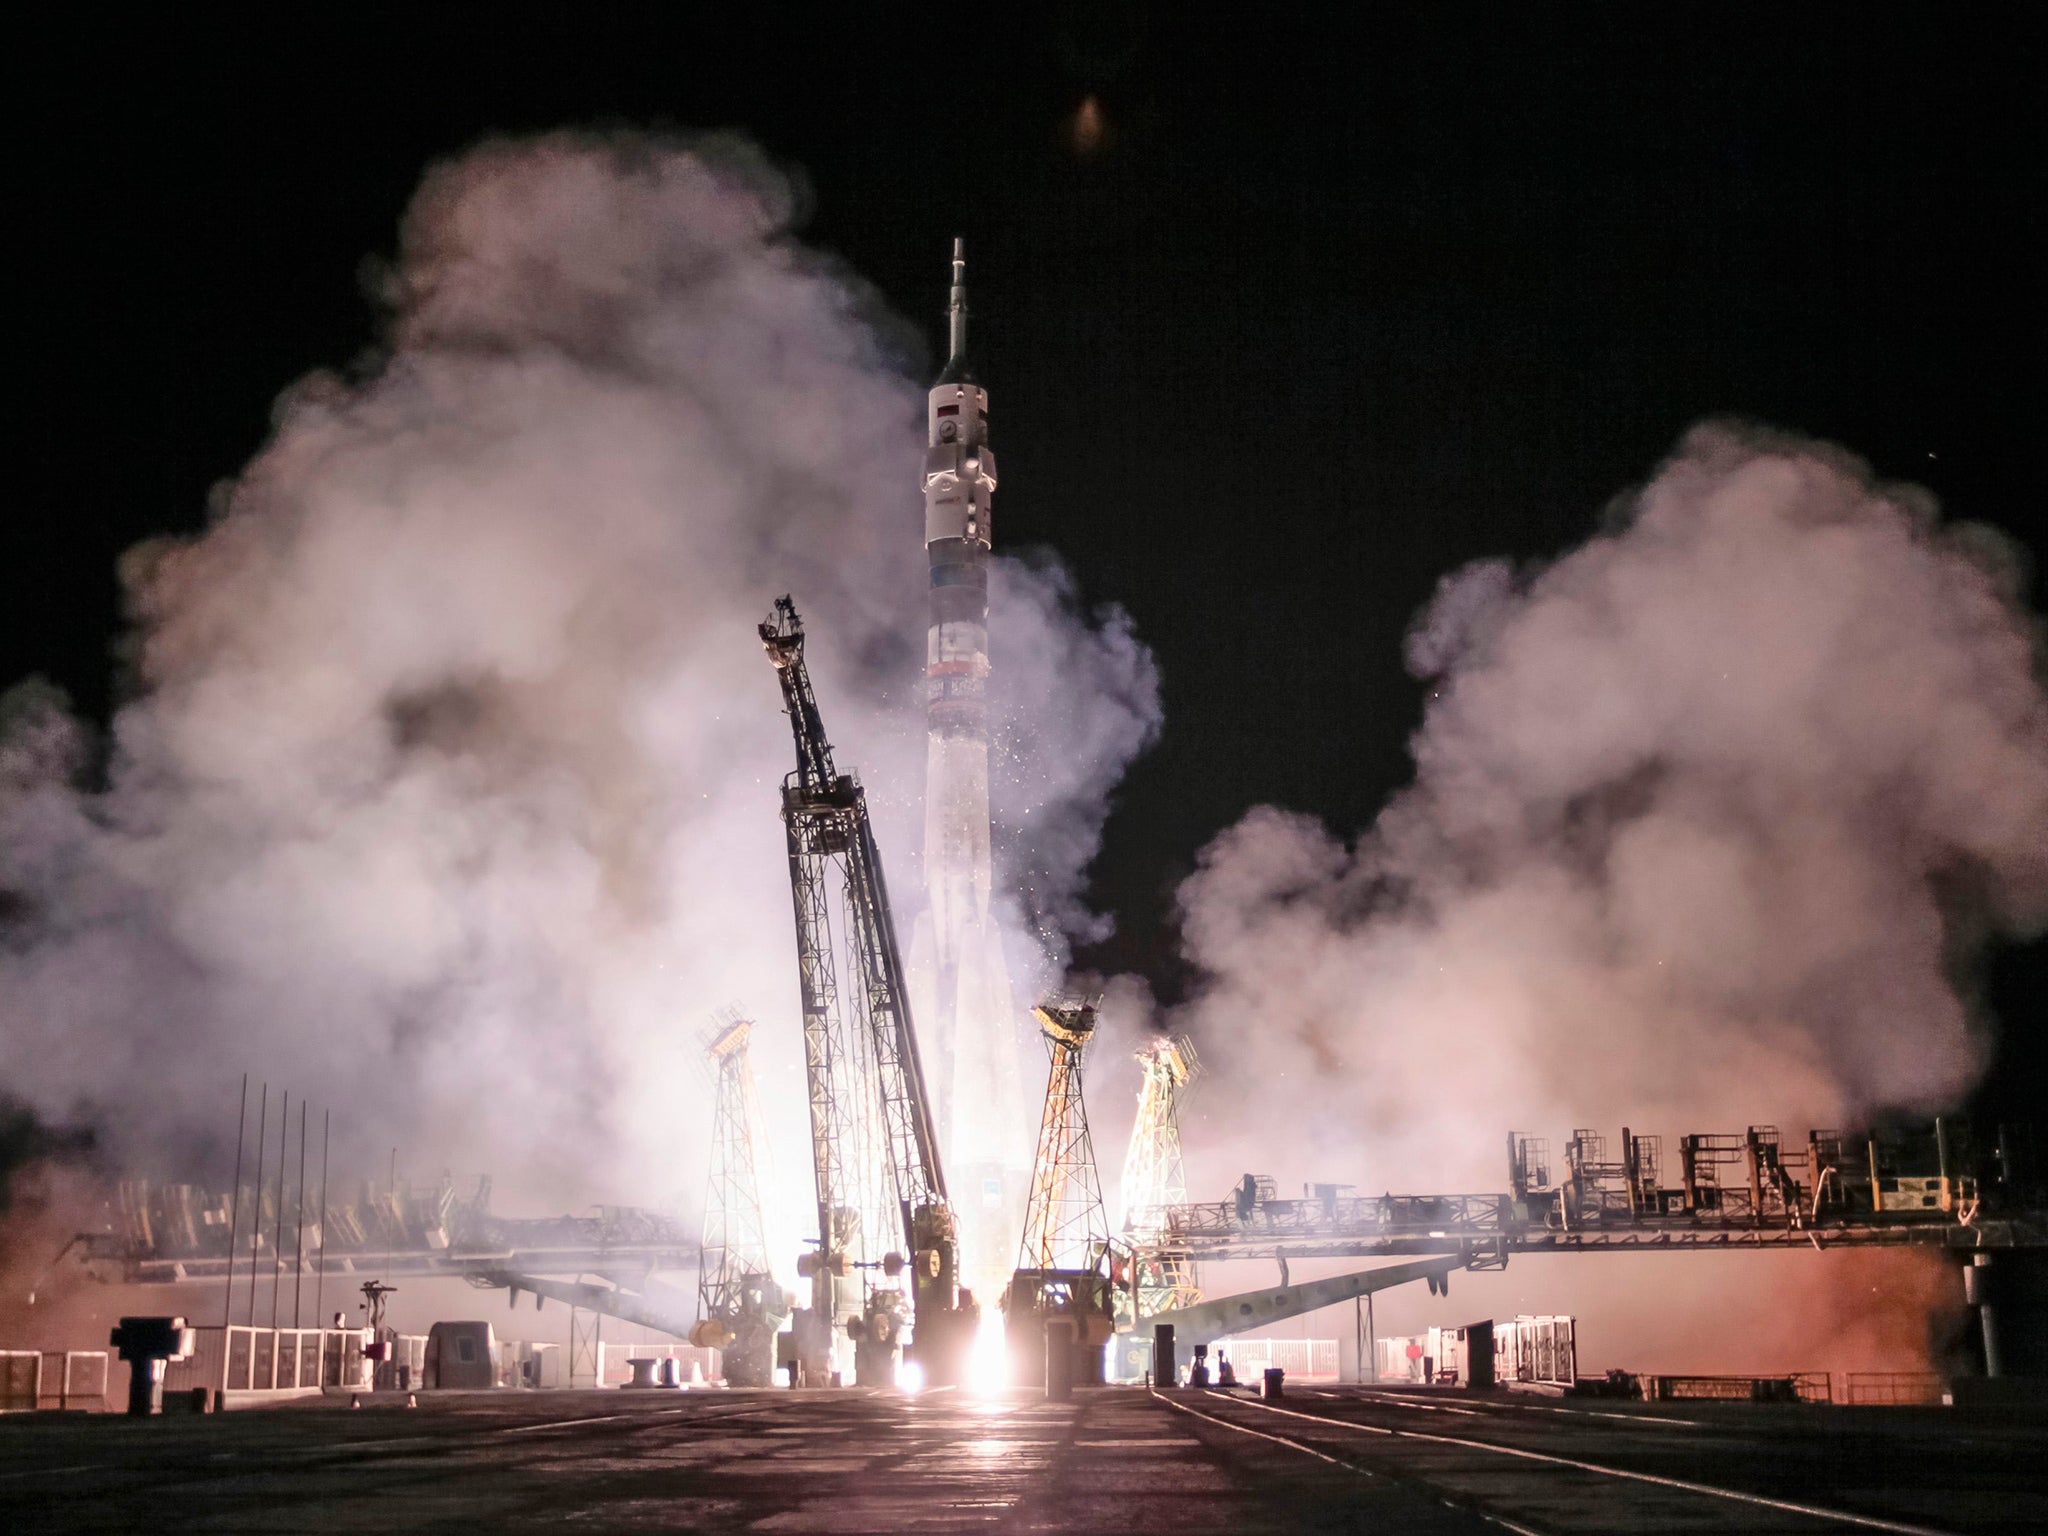 The Soyuz TMA-14M spacecraft carrying the International Space Station crew of Barry Wilmore of the U.S., and Alexander Samokutyaev and Elena Serova of Russia blasts off from the launch pad at the Baikonur cosmodrome